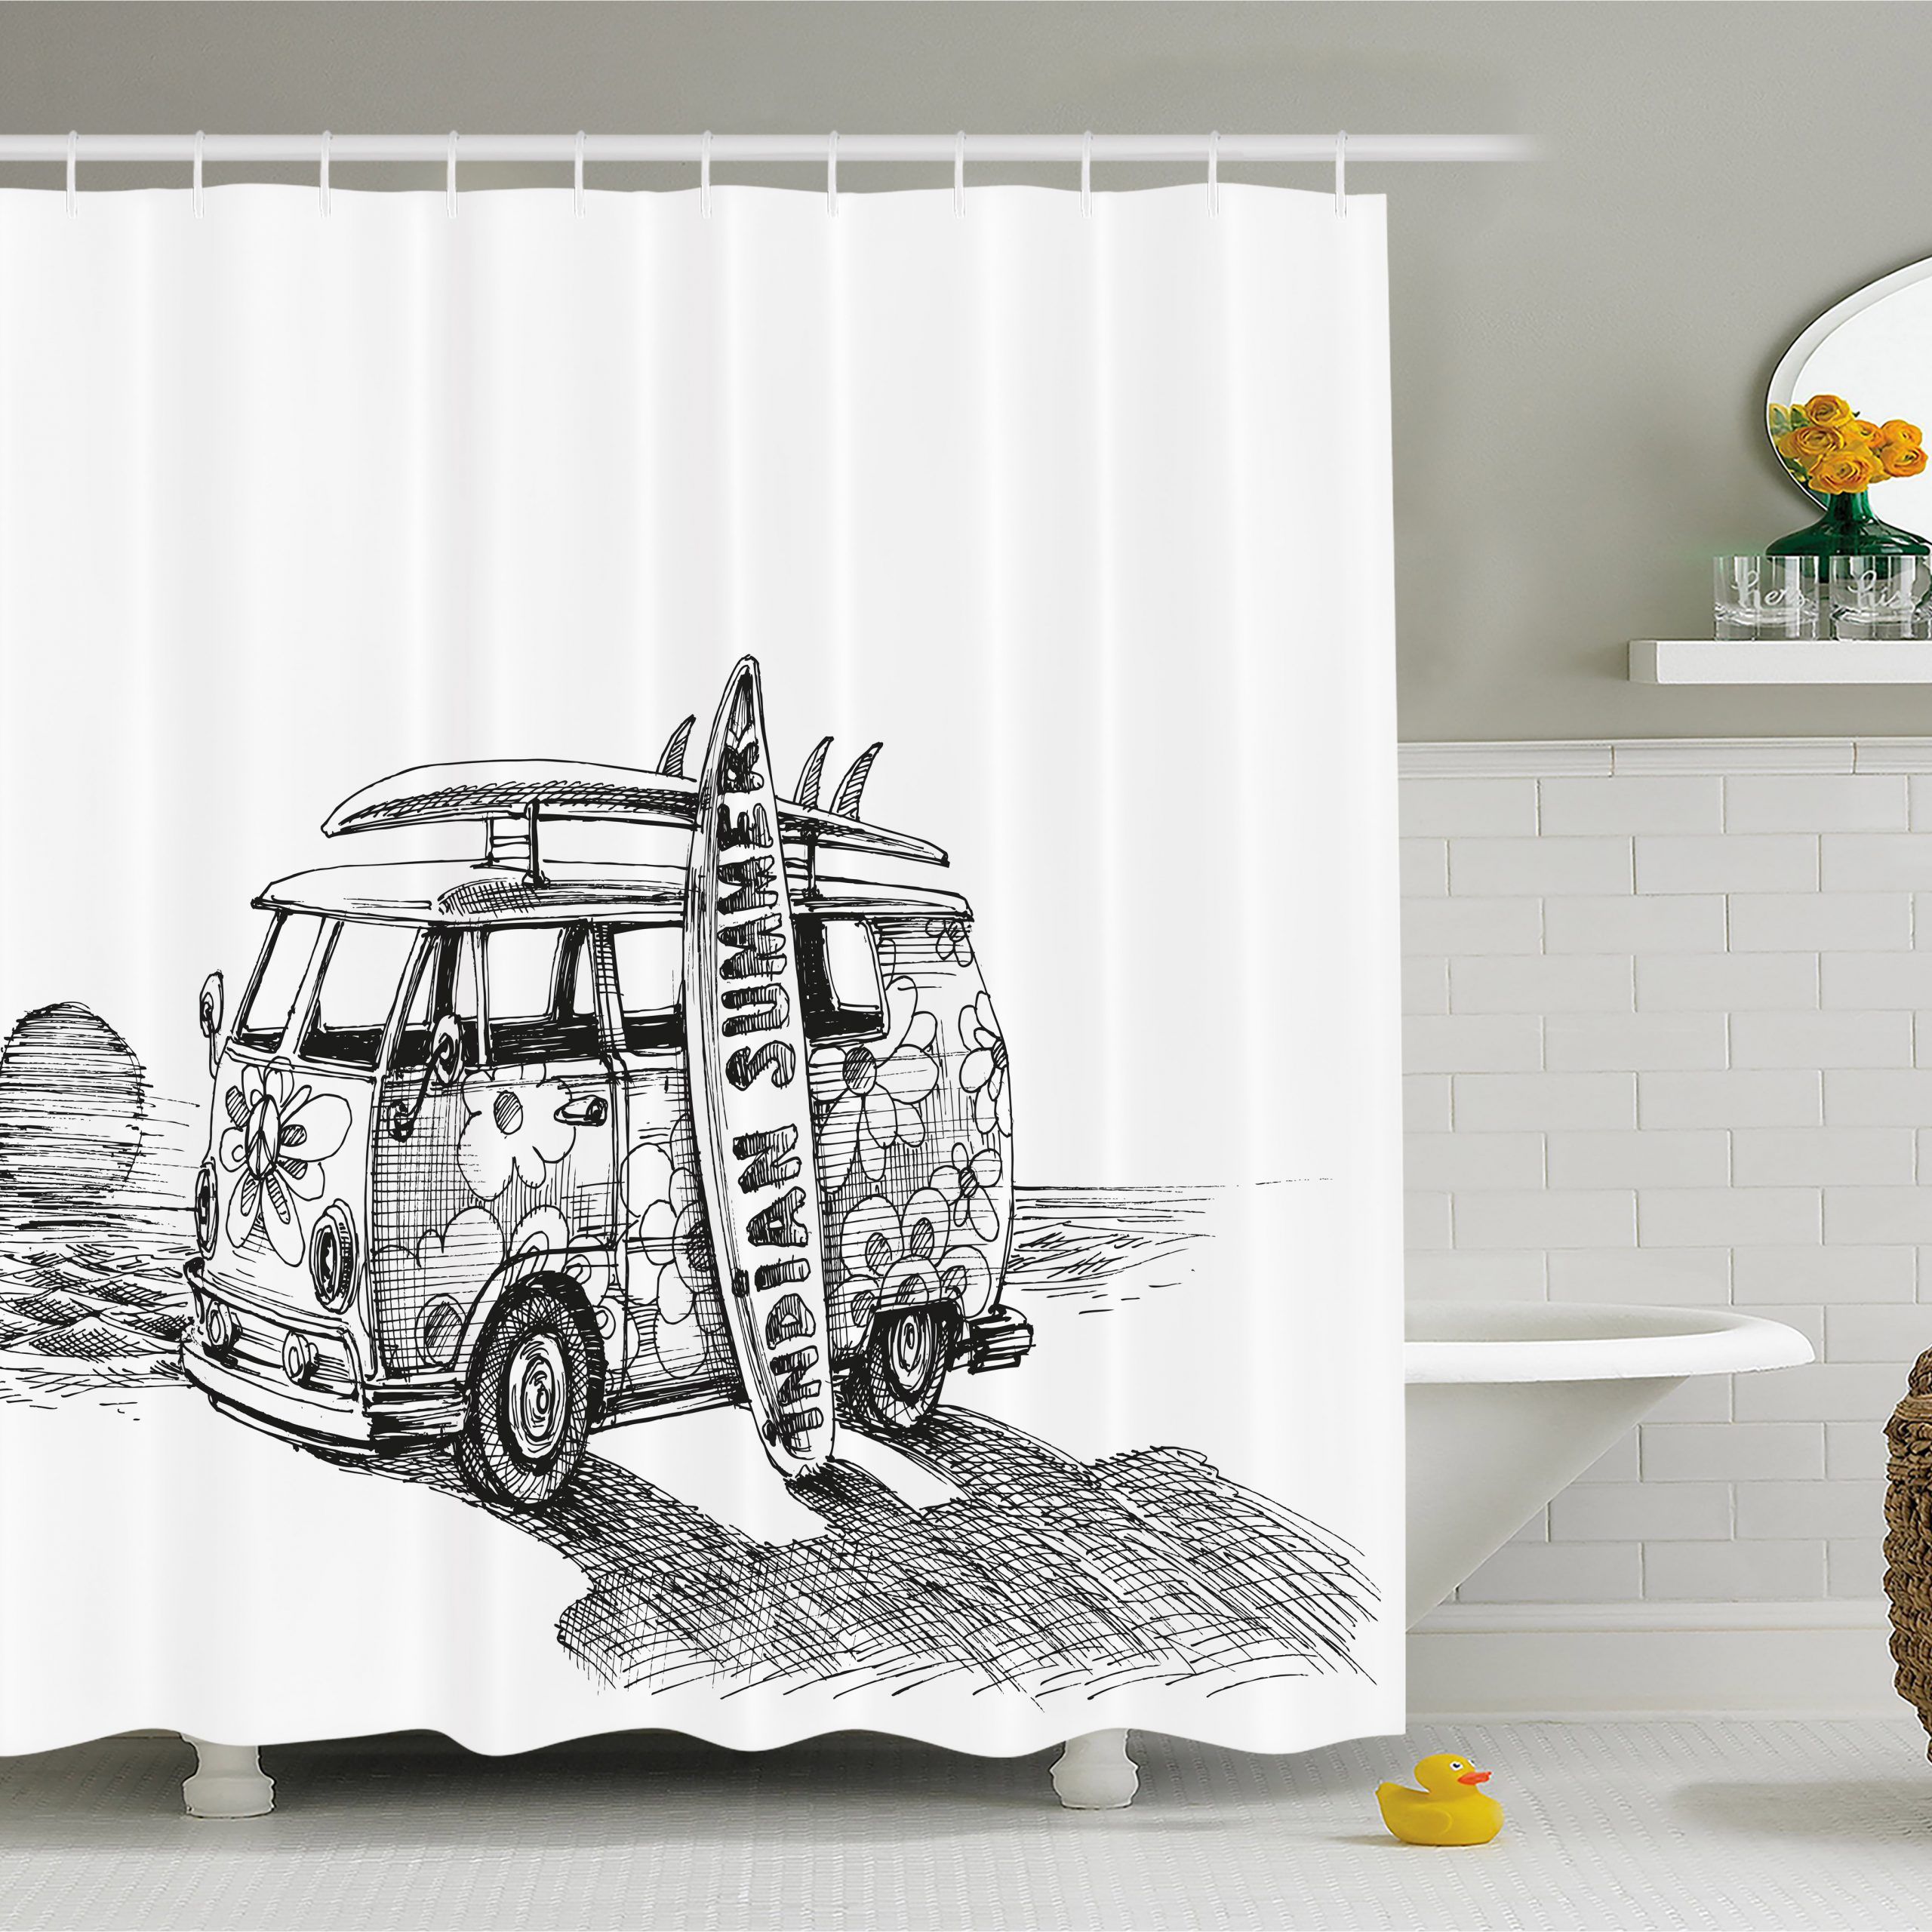 Sketchy Shower Curtain, Hot Summer Californian Surfing Vintage Car Sea  Shore Beach Art, Fabric Bathroom Set With Hooks, Black White And Charcoal  Grey, Regarding Vintage Sea Shore All Over Printed Window Curtains (Photo 5 of 20)